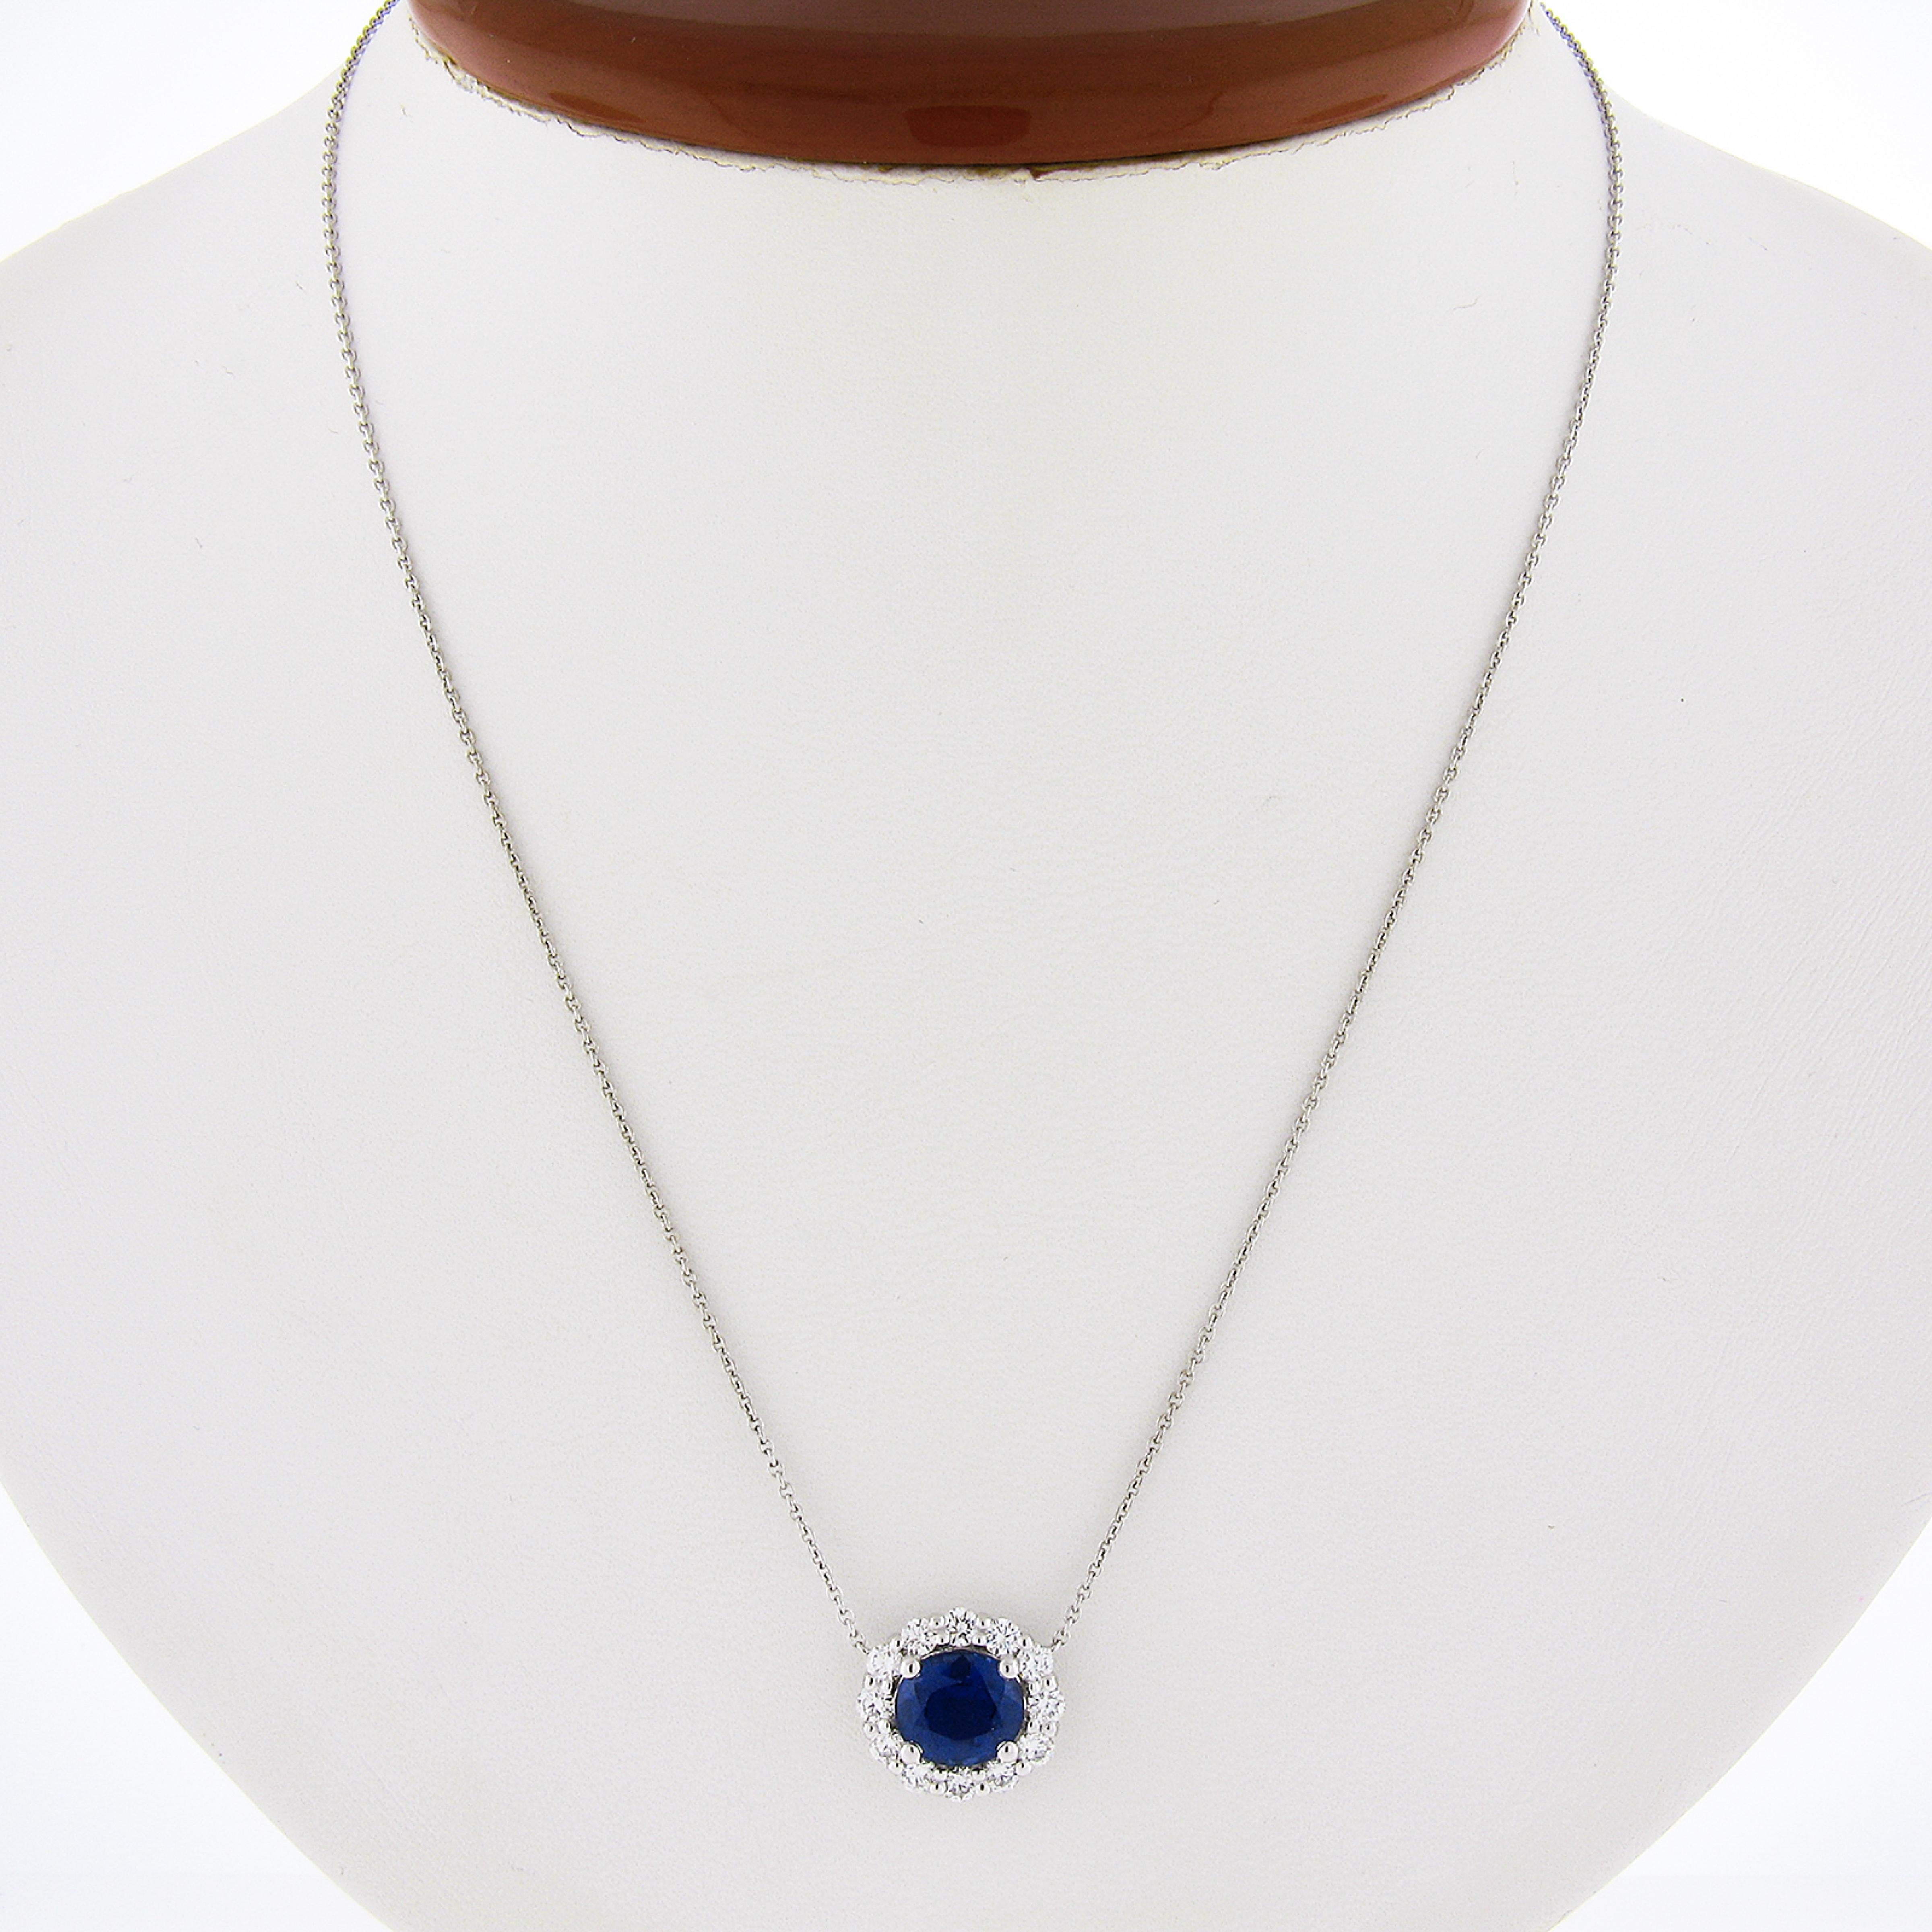 This custom made sapphire and diamond necklace features a truly magnificent royal blue oval brilliant cut sapphire certified by GIA. This mesmerizing blue sapphire is surrounded by a halo of fine quality diamonds that add a fancy and elegant touch